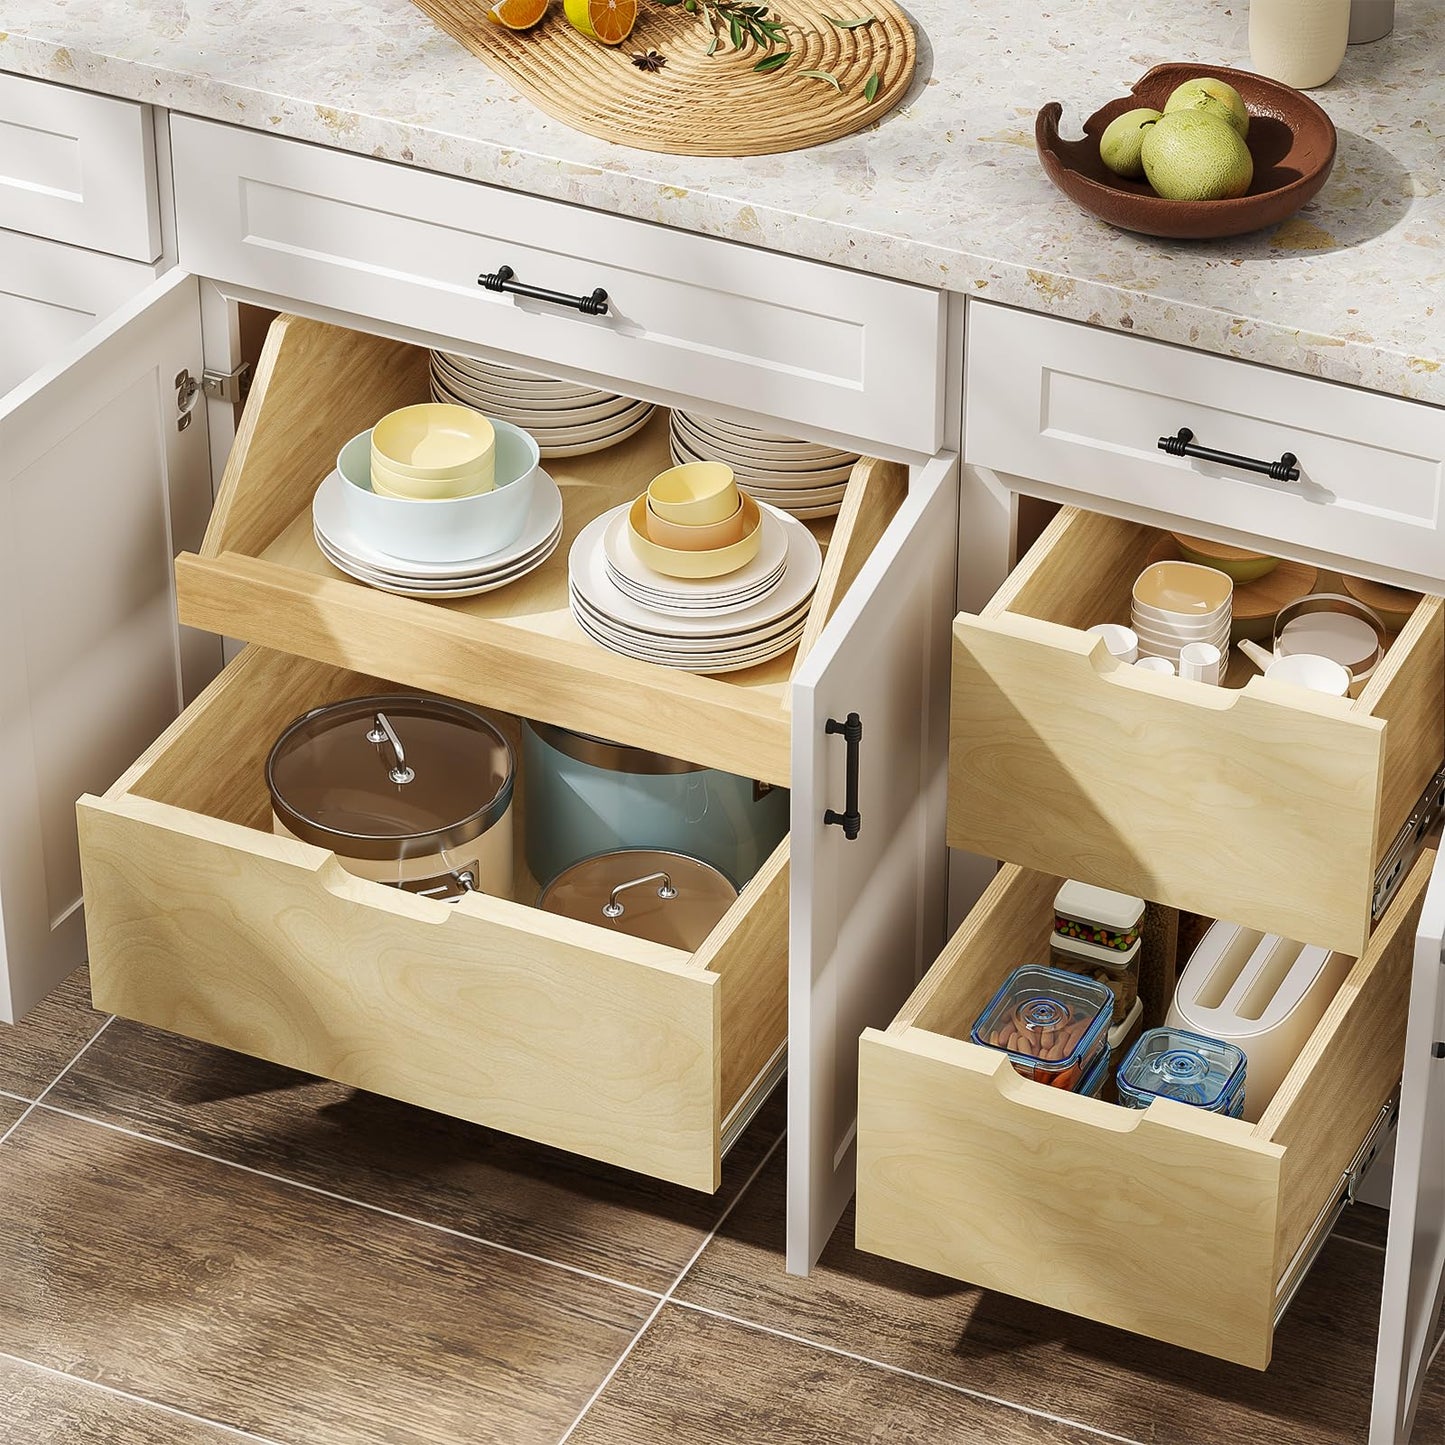 Wooden Rectangular High Pull Out Cabinet Organizer